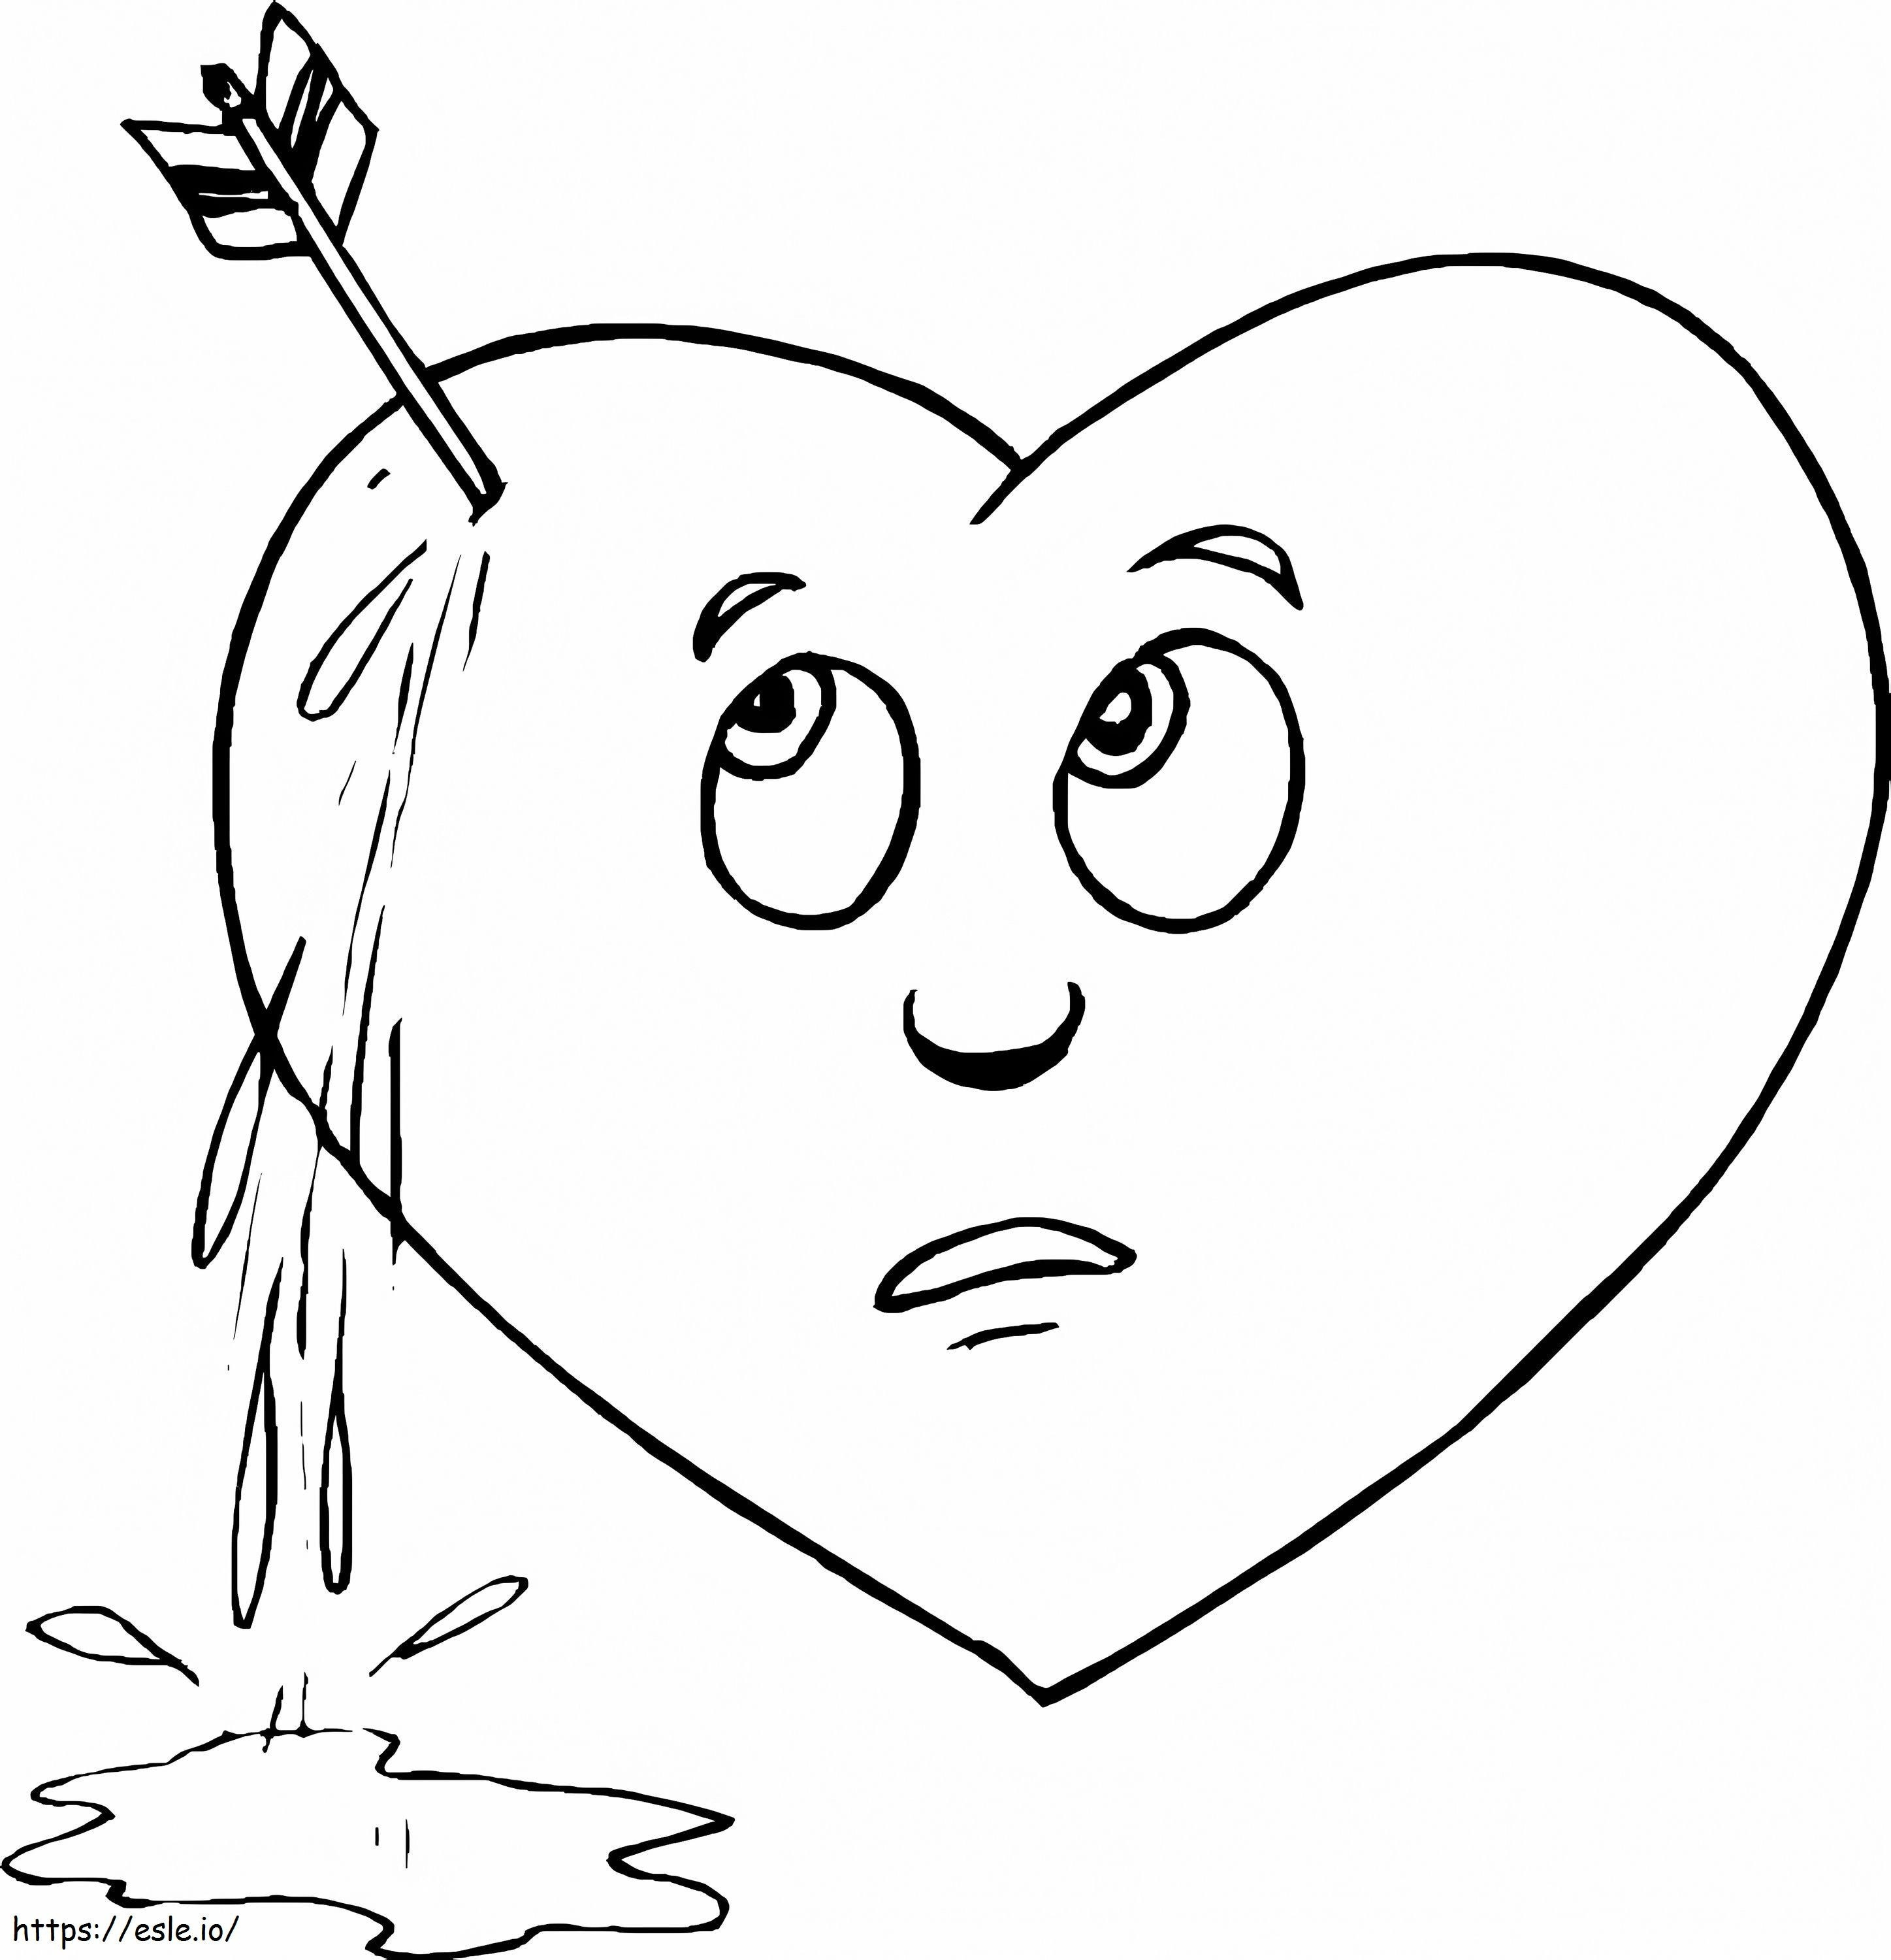 Heart With Arrow coloring page